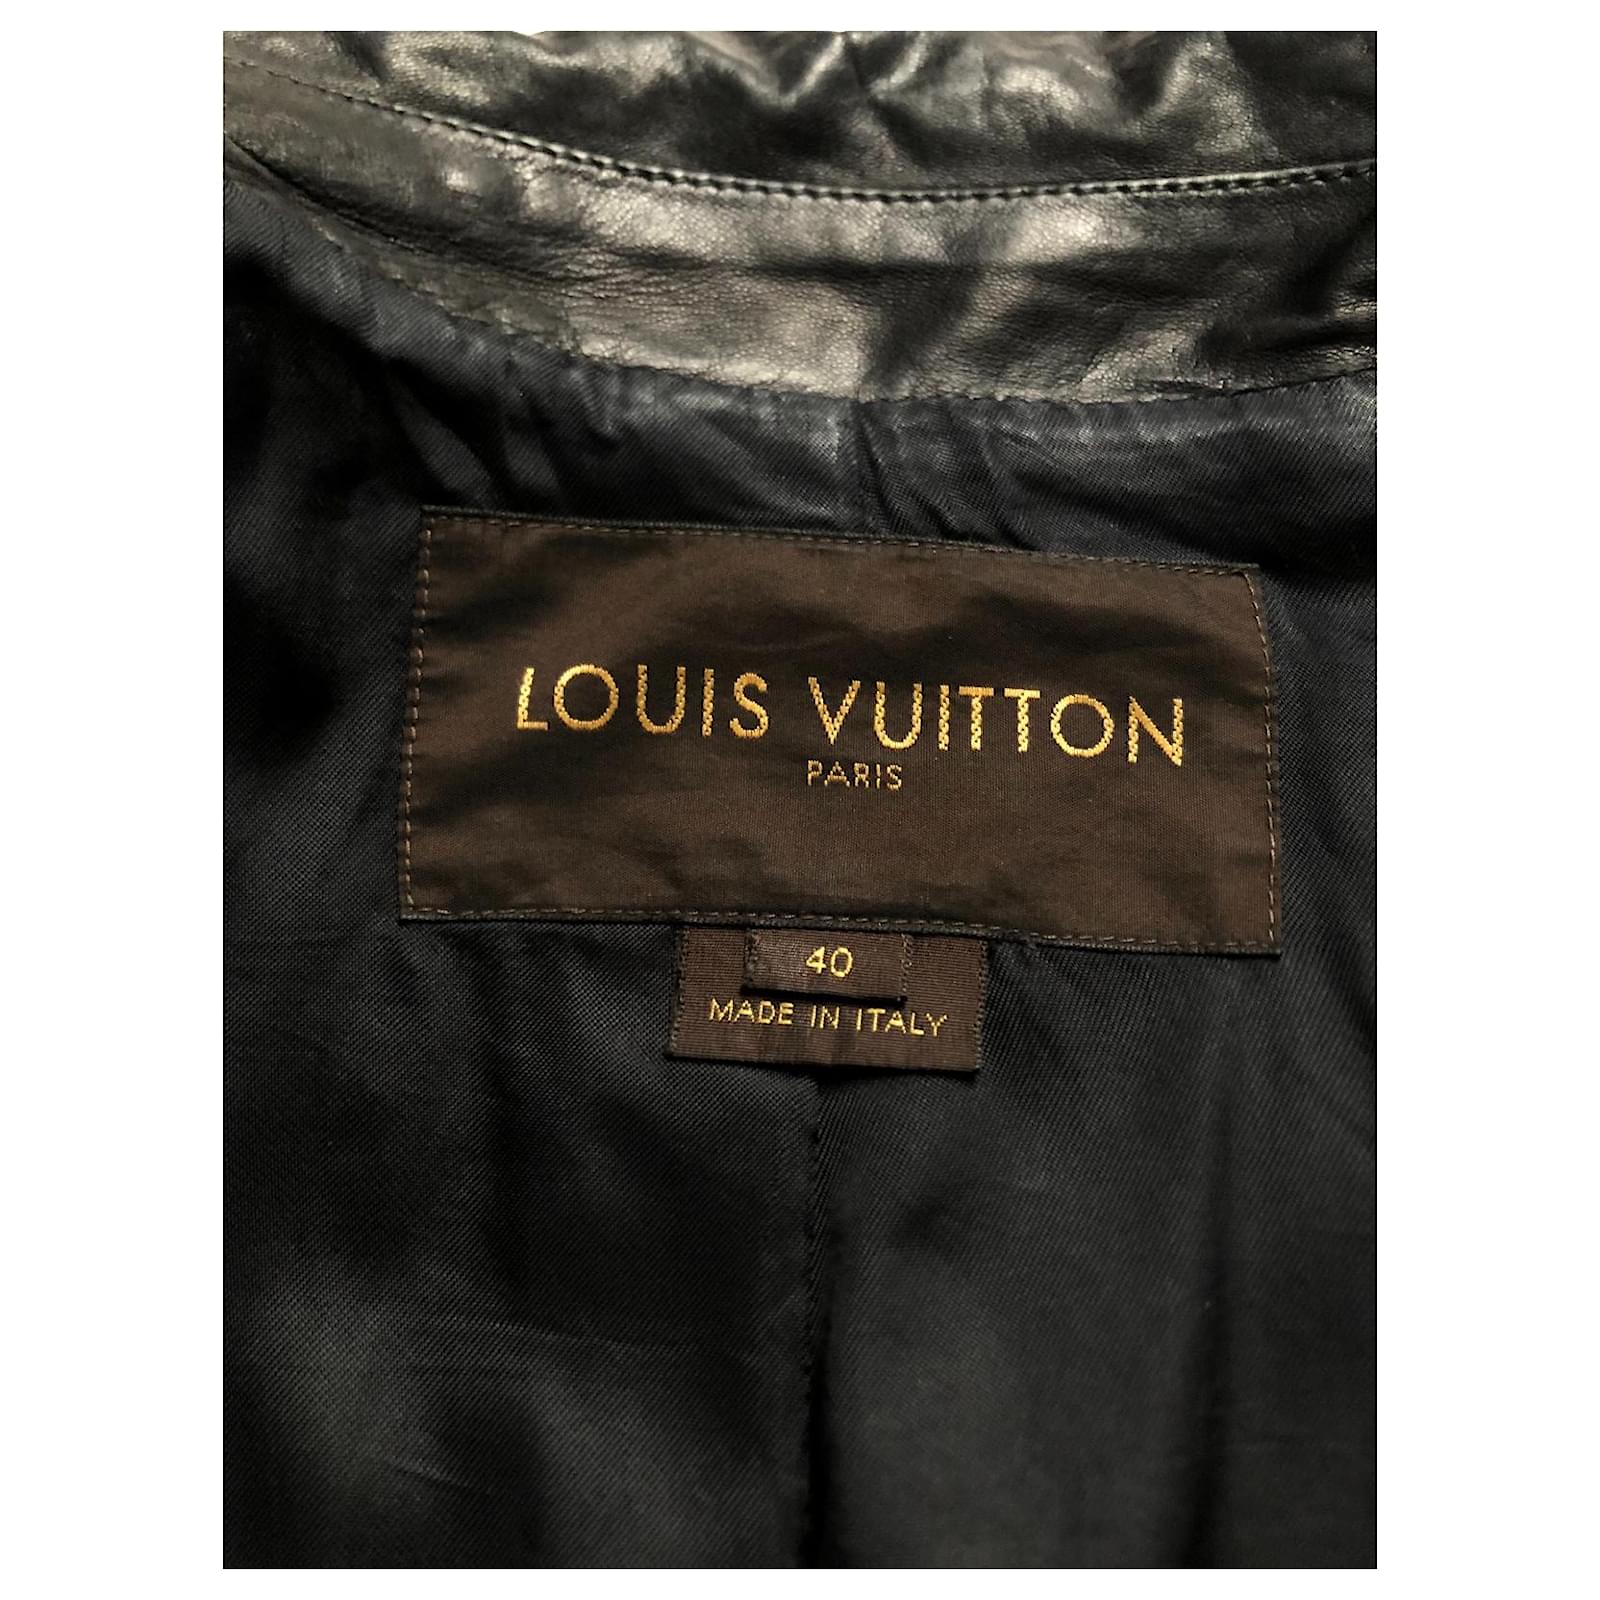 louis vuitton embossed leather jacket